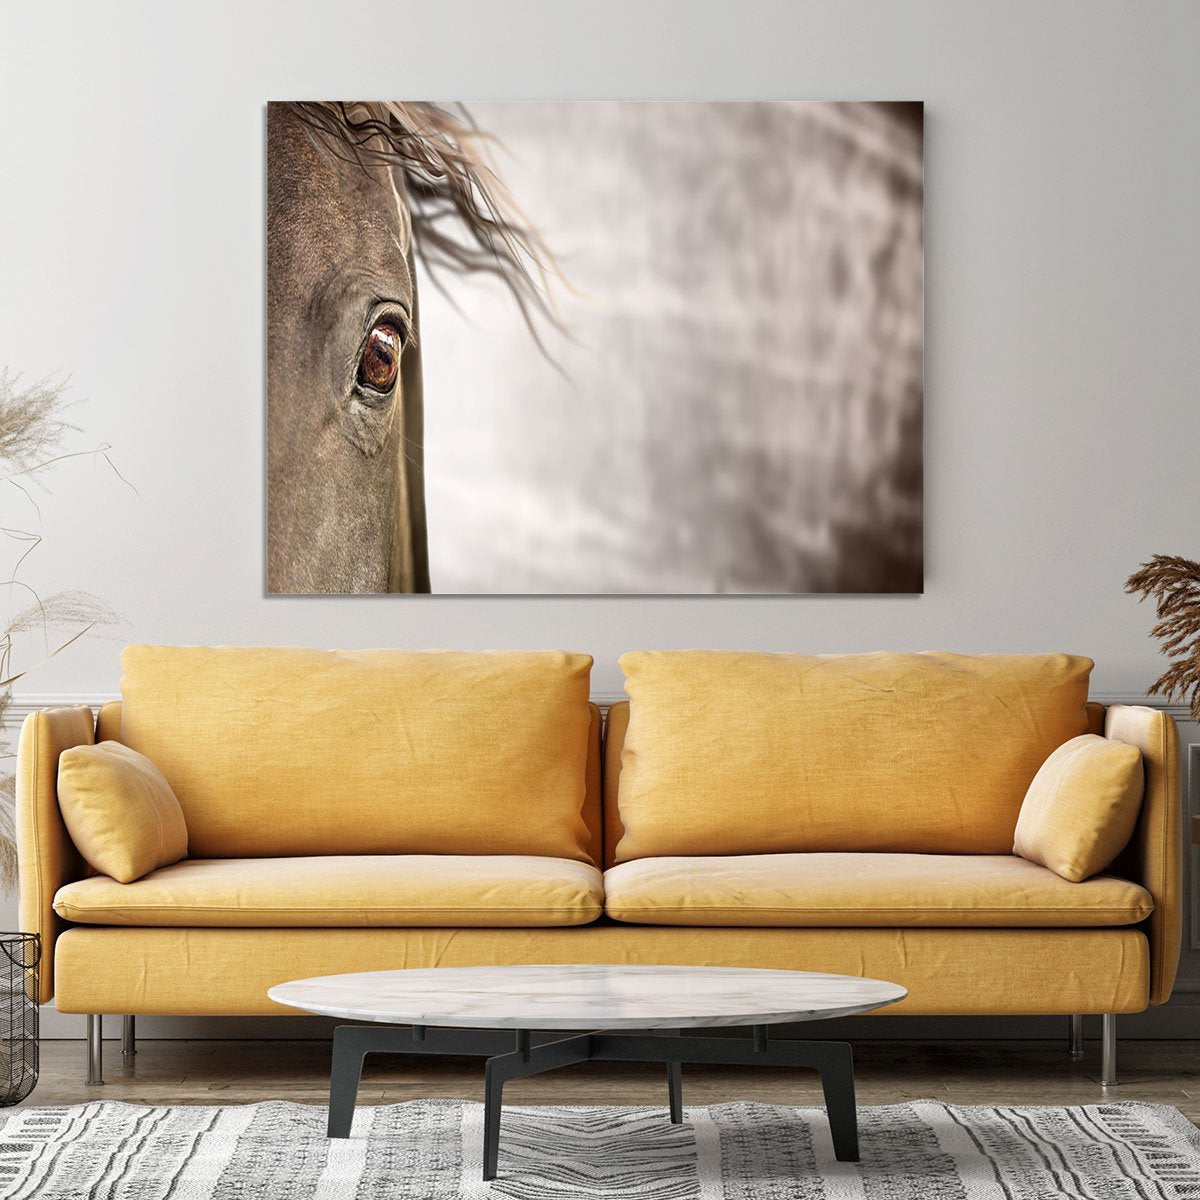 Eye of horse Canvas Print or Poster